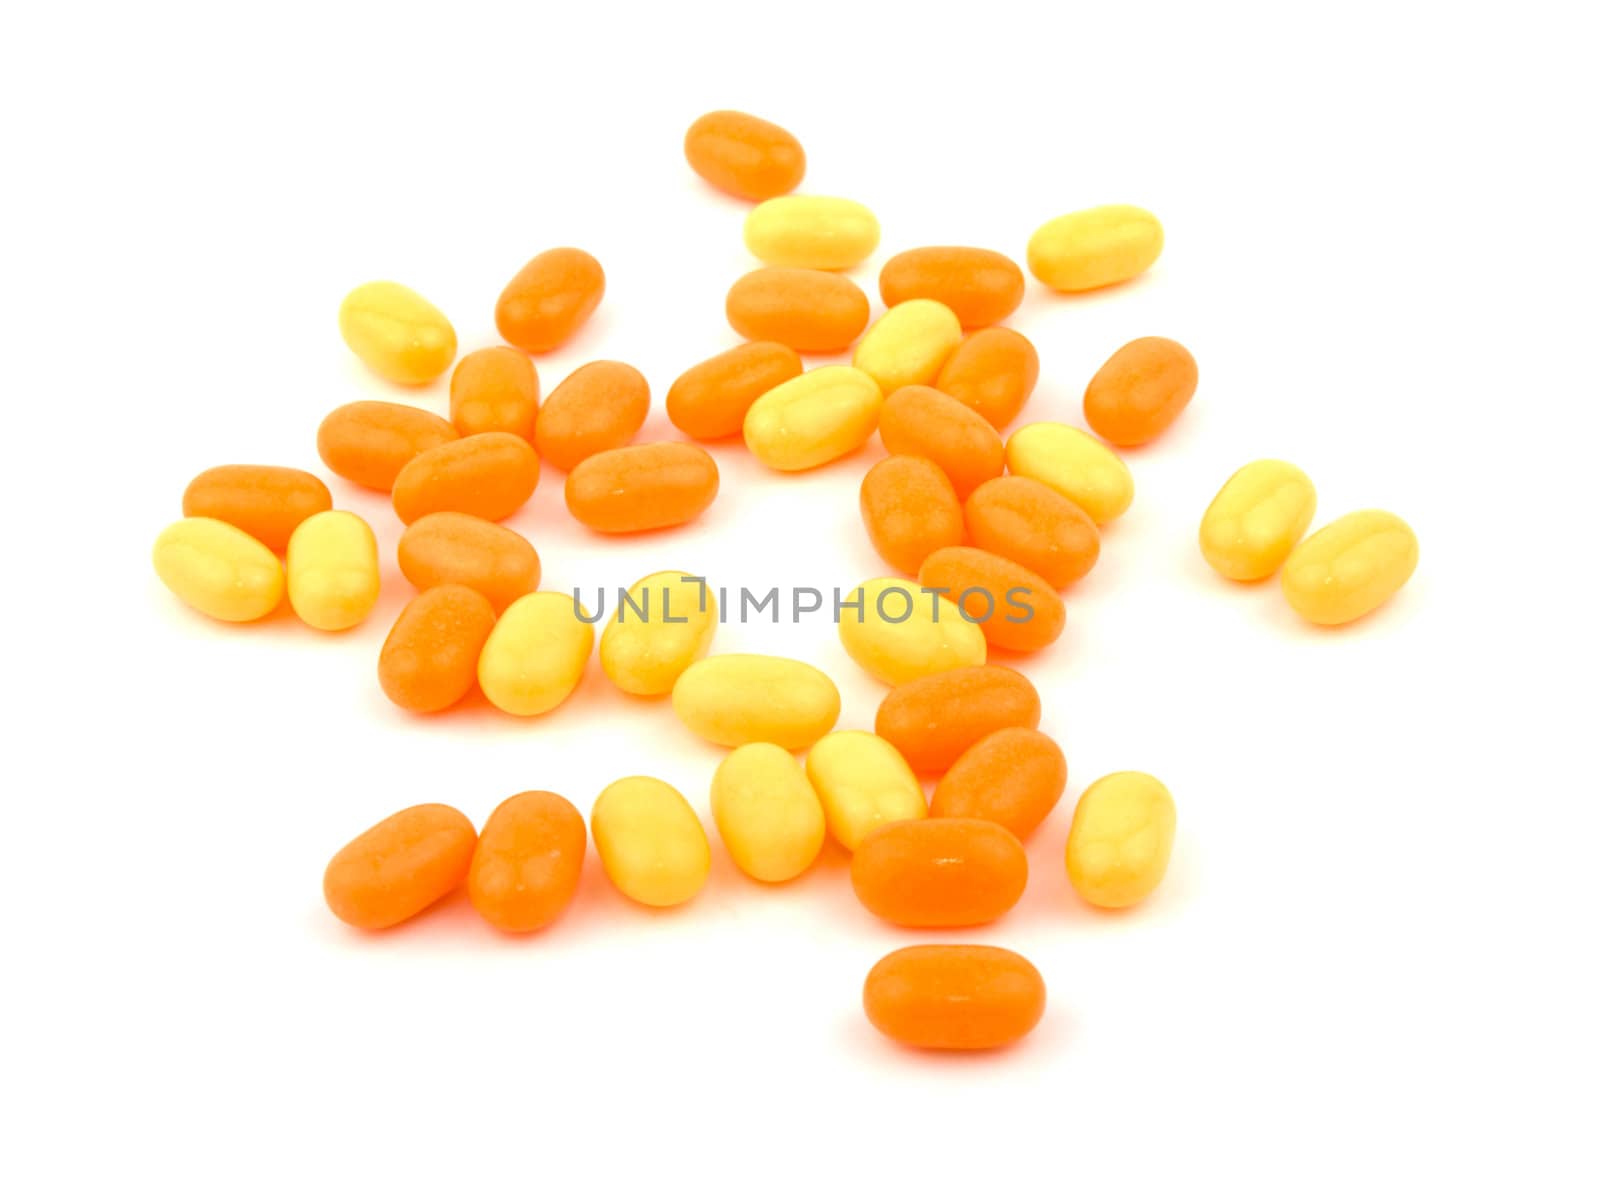 Orange and yellow candies on white background